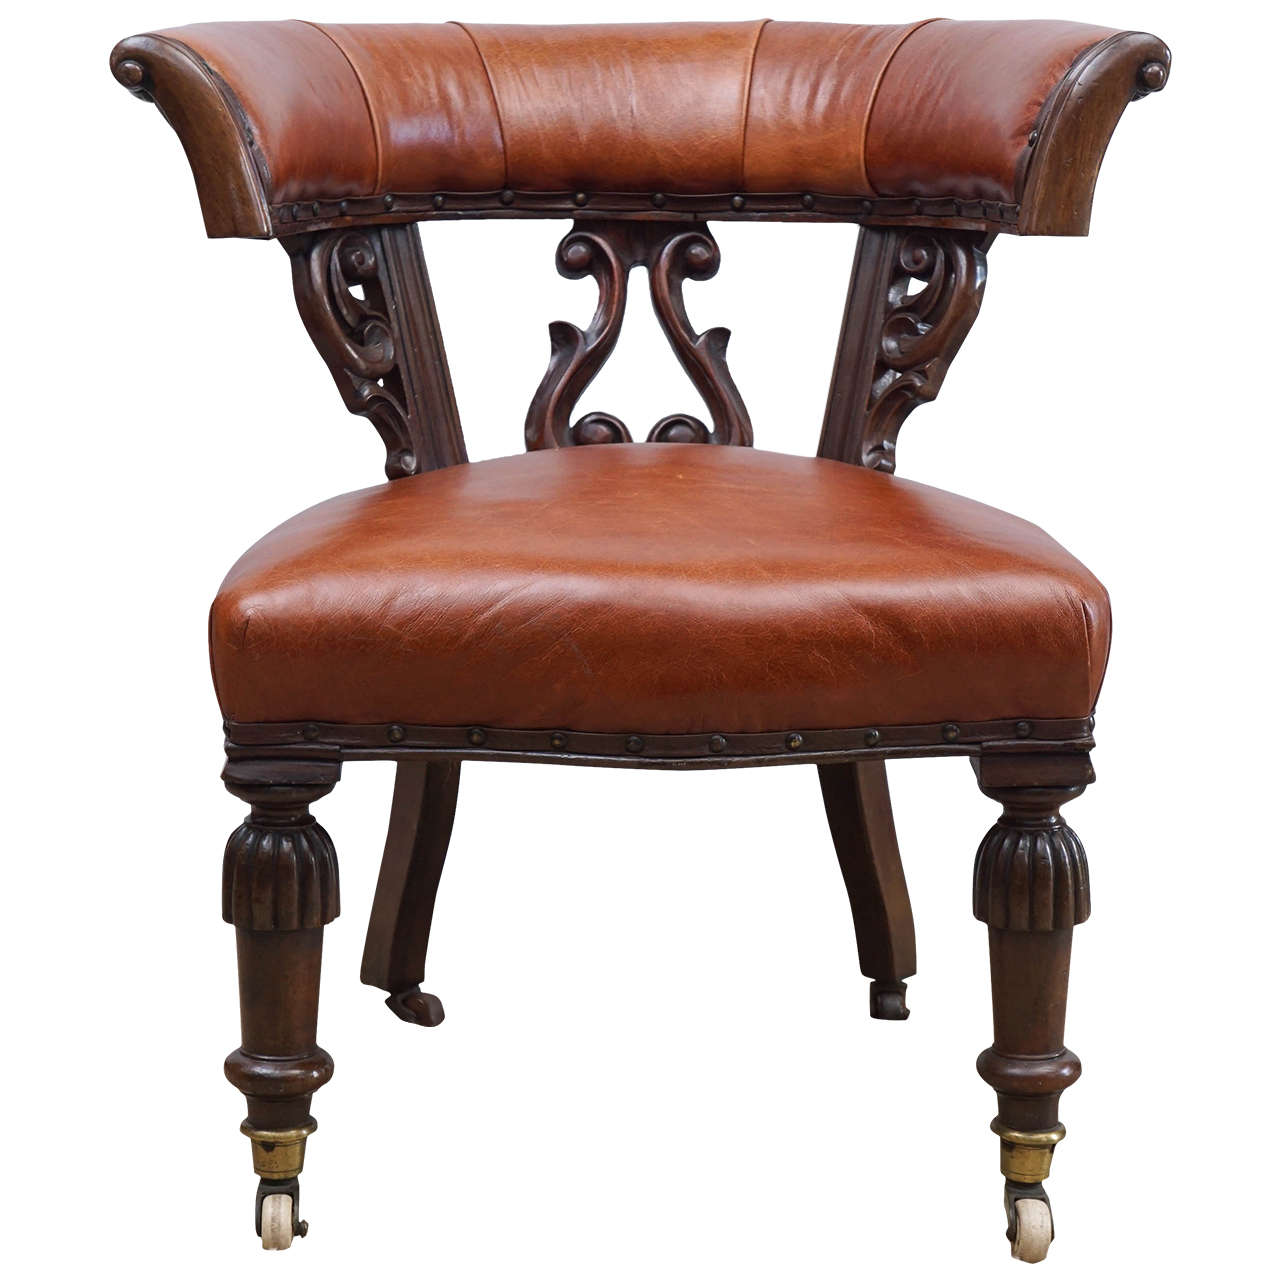 Mid-19th Century English Leather Chair on Casters For Sale